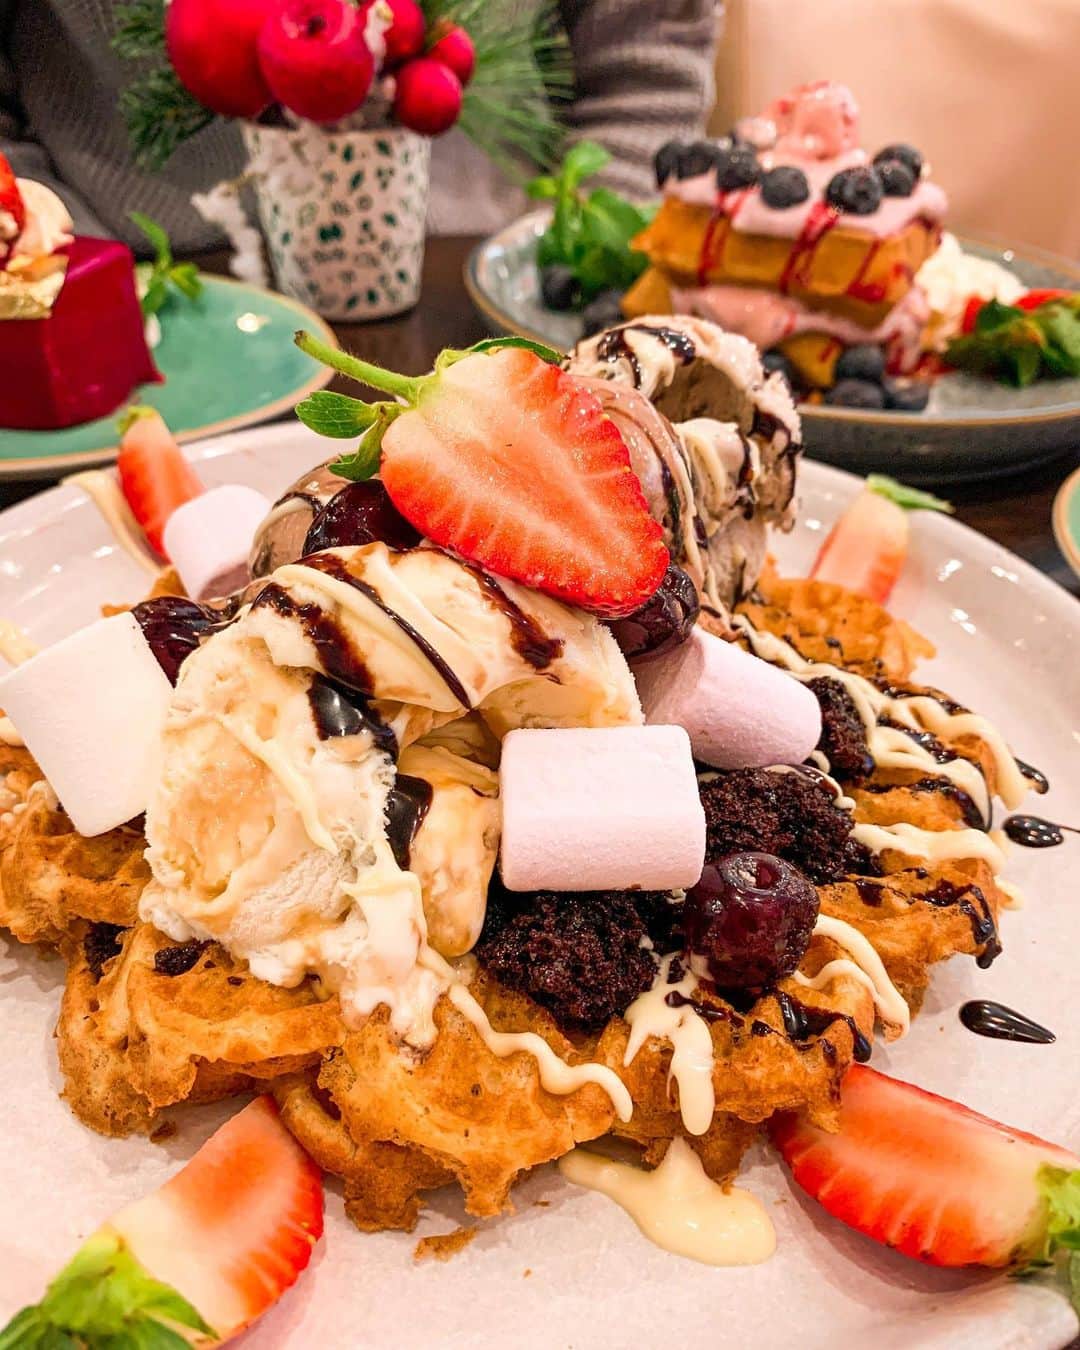 Eat With Steph & Coのインスタグラム：「Warm, sweet and crispy Swedish waffles 🧇 paired with a generous dollop of ice cream and all things nice @kula_uk 💖 Perfect for satisfying a sweet tooth and for a winter day treat to share! 🤤✨   #invite  📸 @rain.sprout  #foodstagram #eeeeeats #forkyeah #londonfood #timeoutlondon #eatlondon #infatuationlondon #foodenvy #eatinglondon #foodinlondon #waffles #swedishwaffles #dessert #dessertlovers #londondessert #waffle #icecreamlovers #sweettoothsatisfied #sweettoothcravings #sweettooth #dessertshop #stchristopersplace #marylebone #londondesserts #våfflor #strawberriesandcream #wintertreats #winterdessert #dessertinlondon」